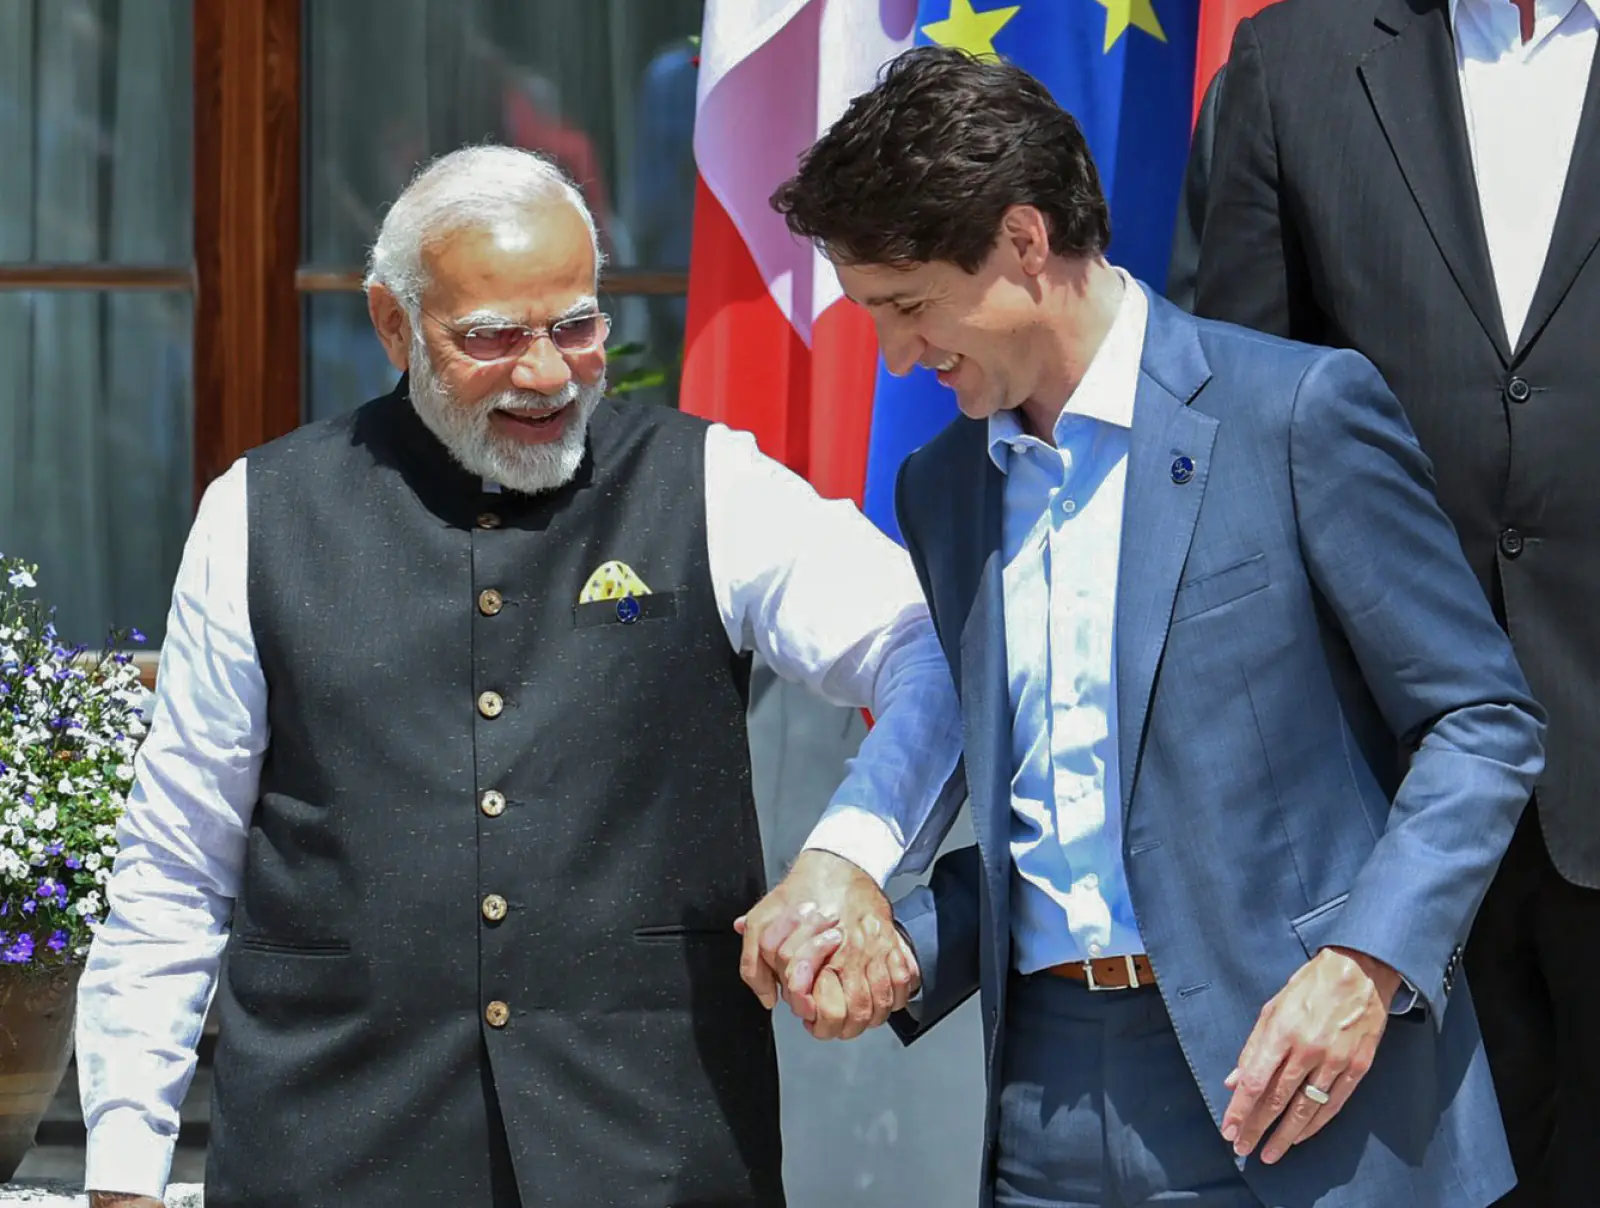 Prime Minister Modi replied to Canadian PM in this manner, Justin Trudeau had congratulated him